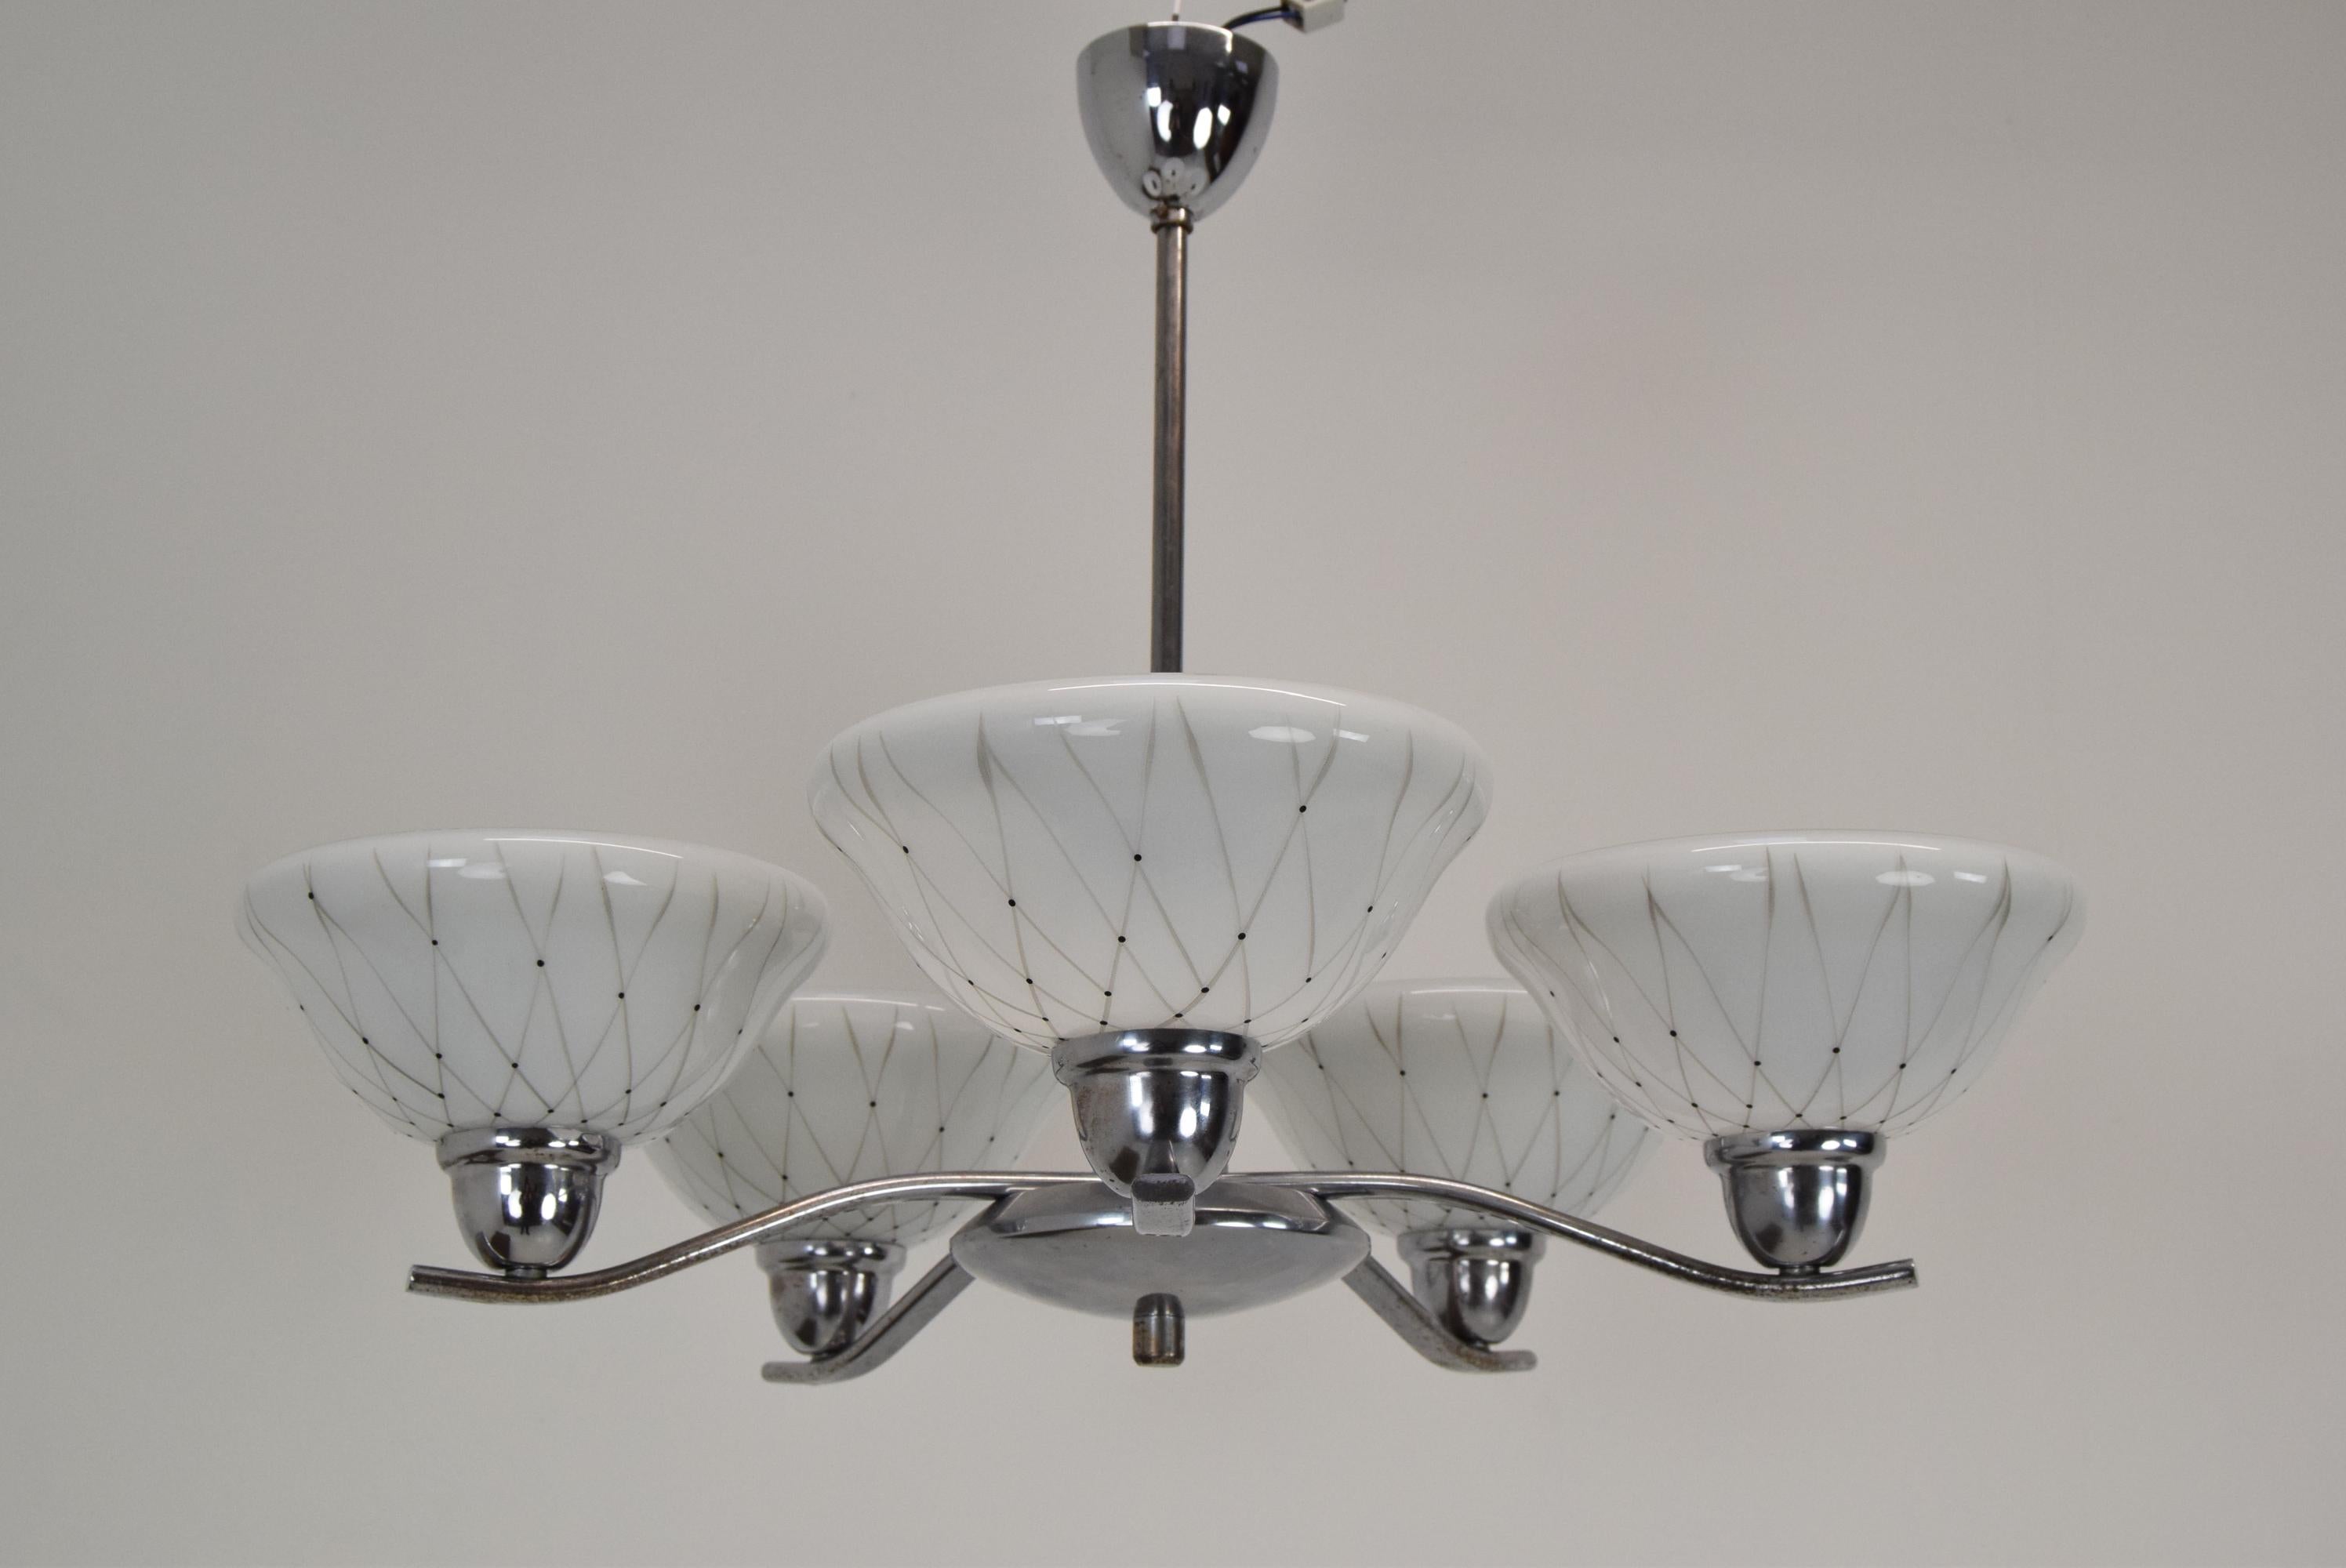 
Made in Czechoslovakia
Made of Glass,Metal,Chrome
The chandelier was completely dasassembled and cleaned
Fitted with new wiring
With aged patina
(One lampshade has a small chip on the inside,but it is not visible from under the chandelier,see